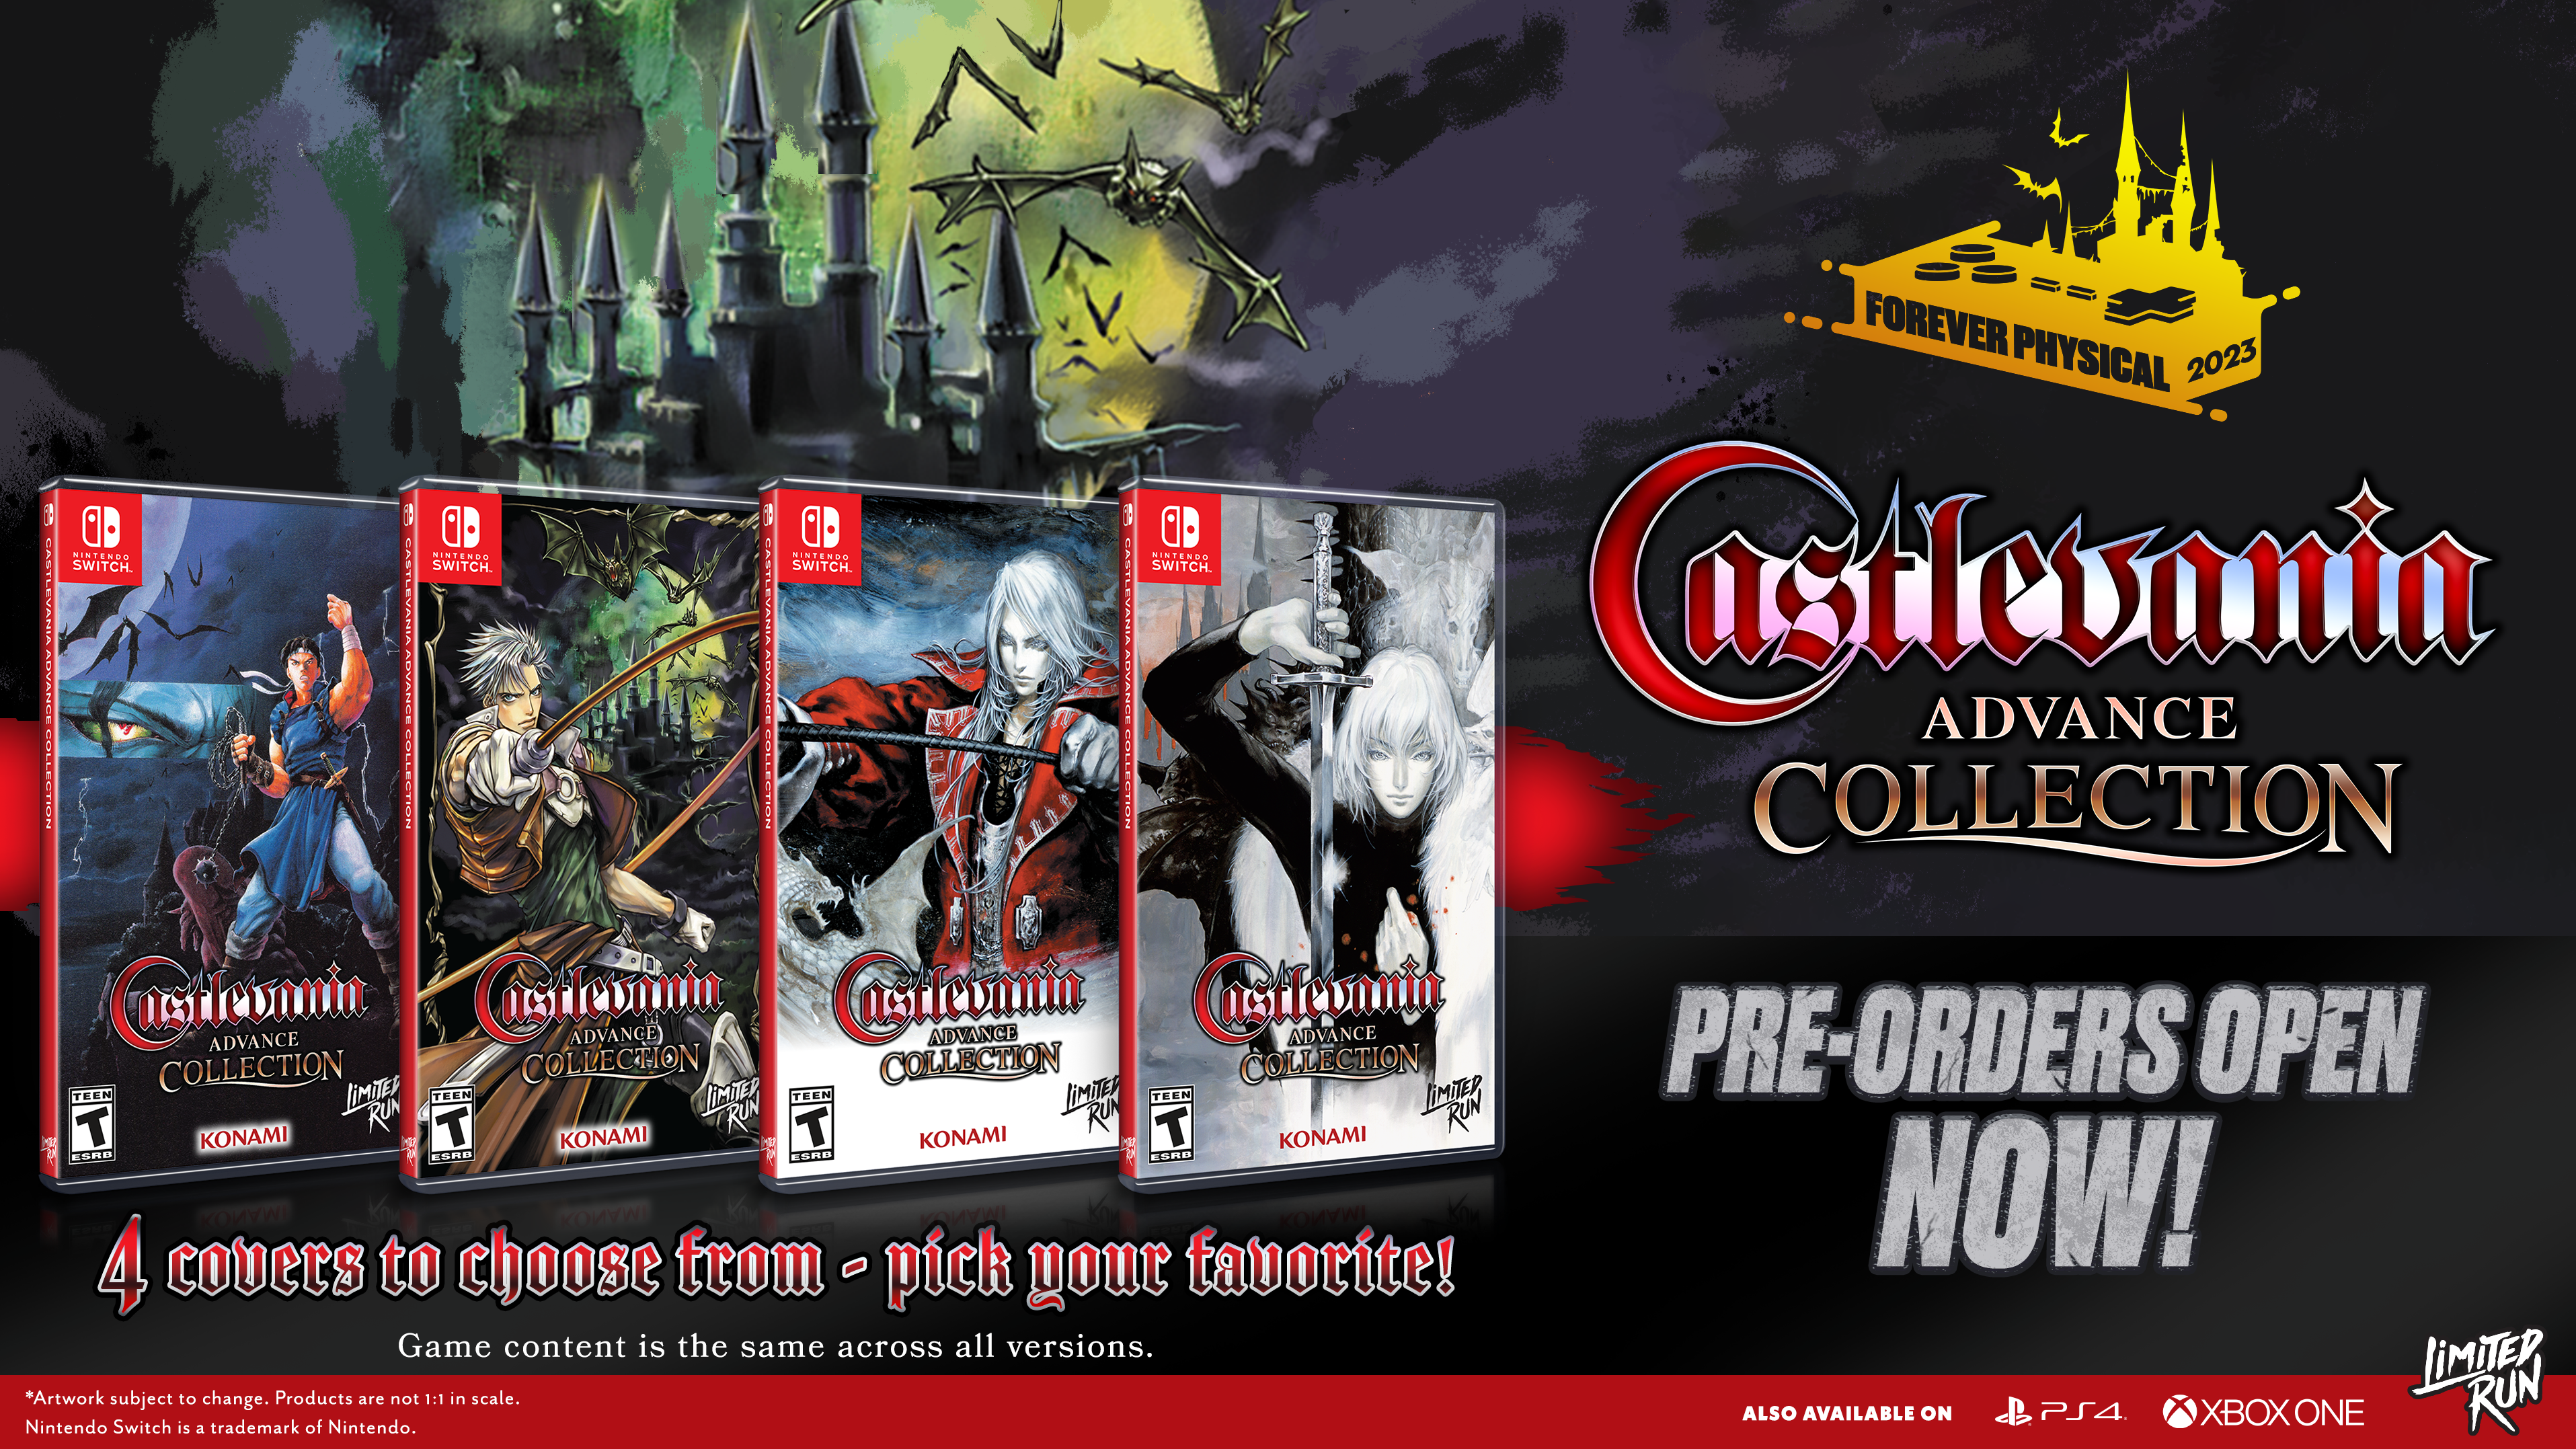 Switch Limited Run #198: Castlevania Advance Collection Advanced